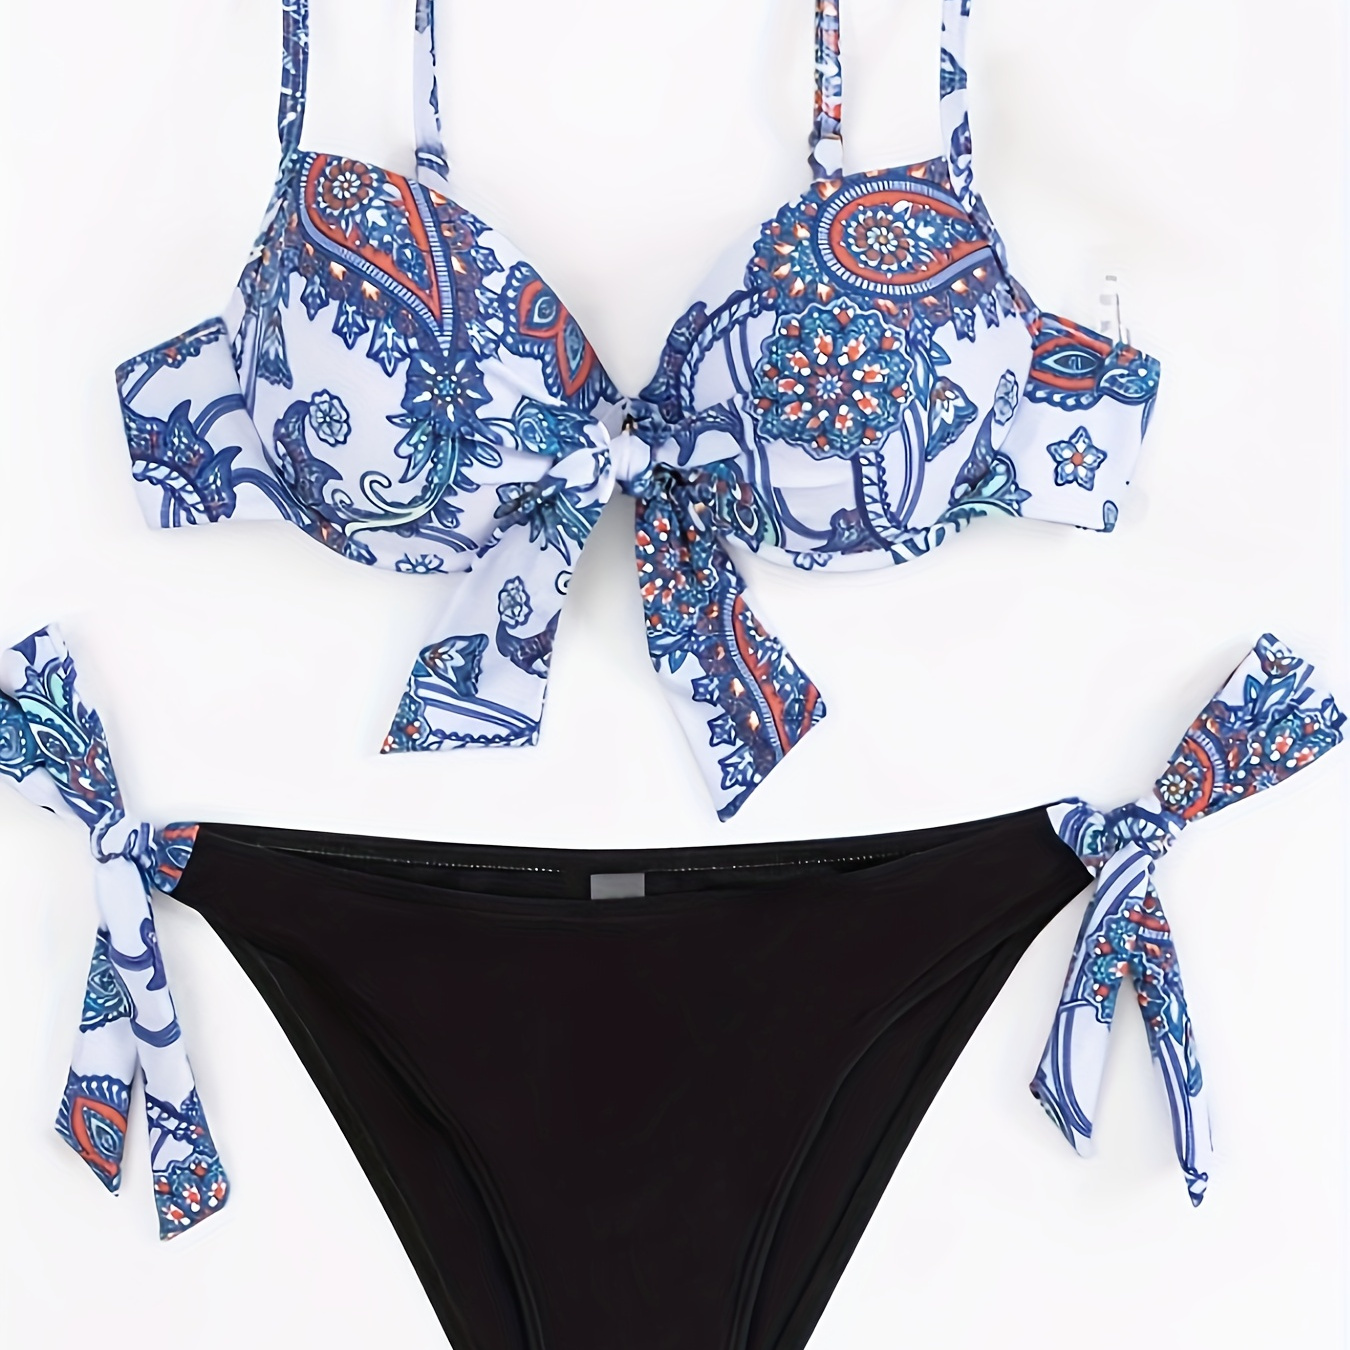 

Blue Paisley Floral Print 2 Piece Set Bikini, Knot Front Spaghetti Strap Bow Tie Underwire Push Up Stretchy Swimsuits, Women's Swimwear & Clothing